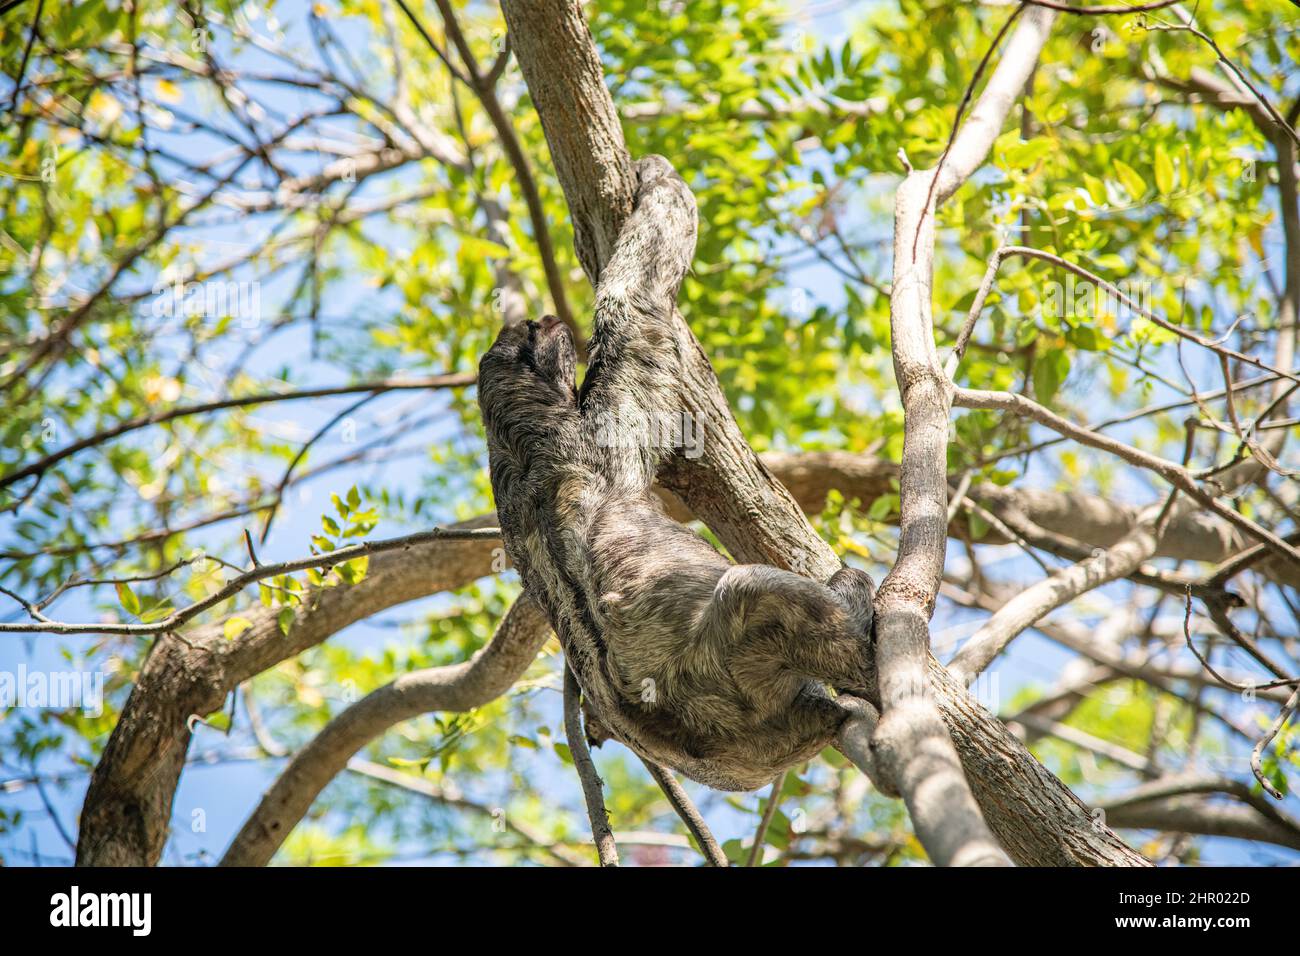 A sloth hanging from a tree in Centenario Park in Cartagena, Colombia Stock Photo